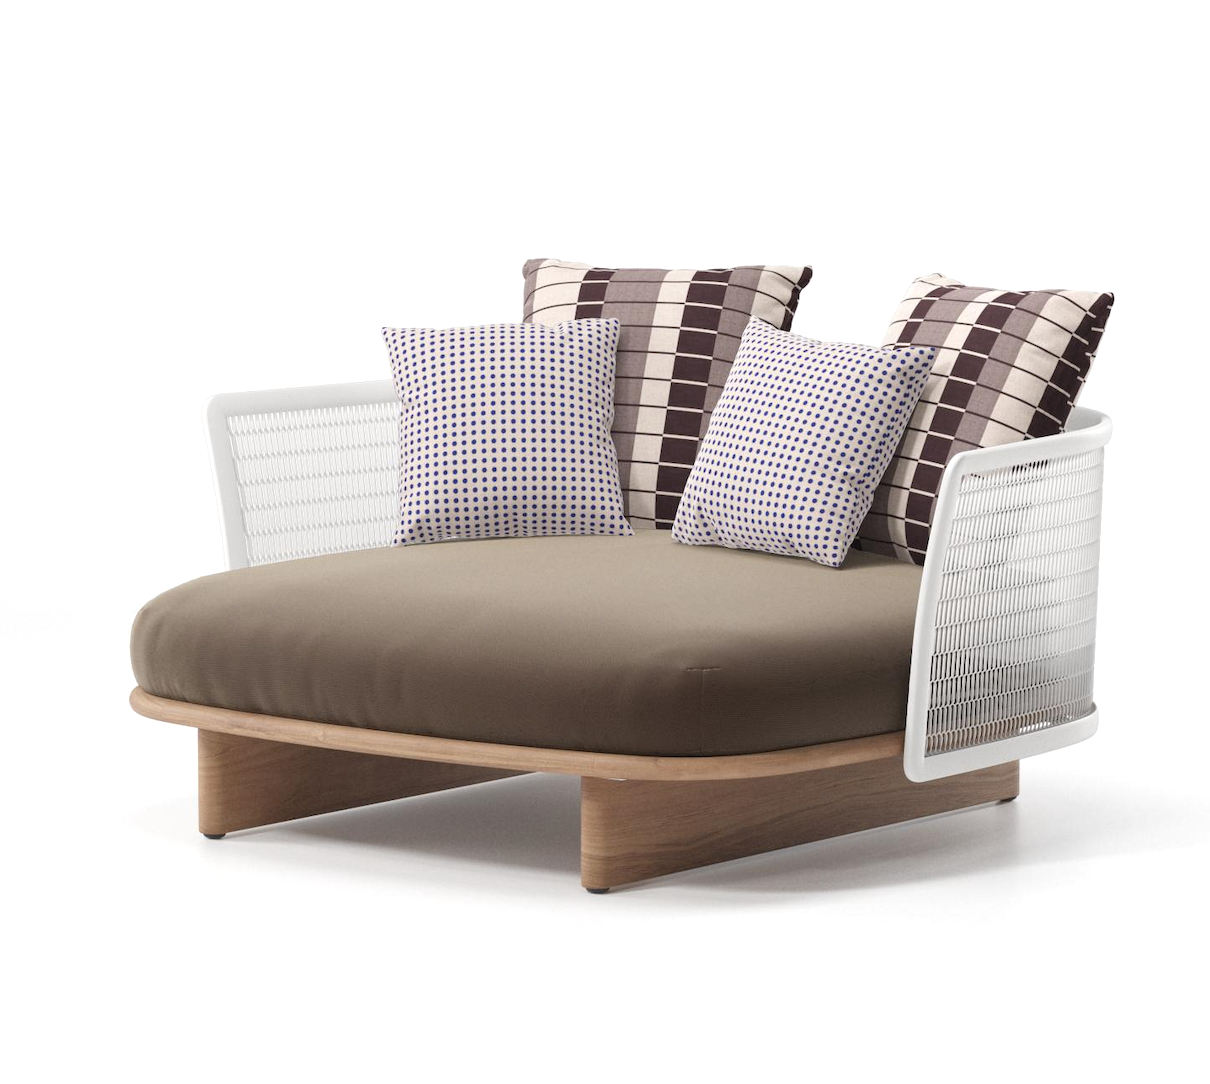 Product Image mesh daybed